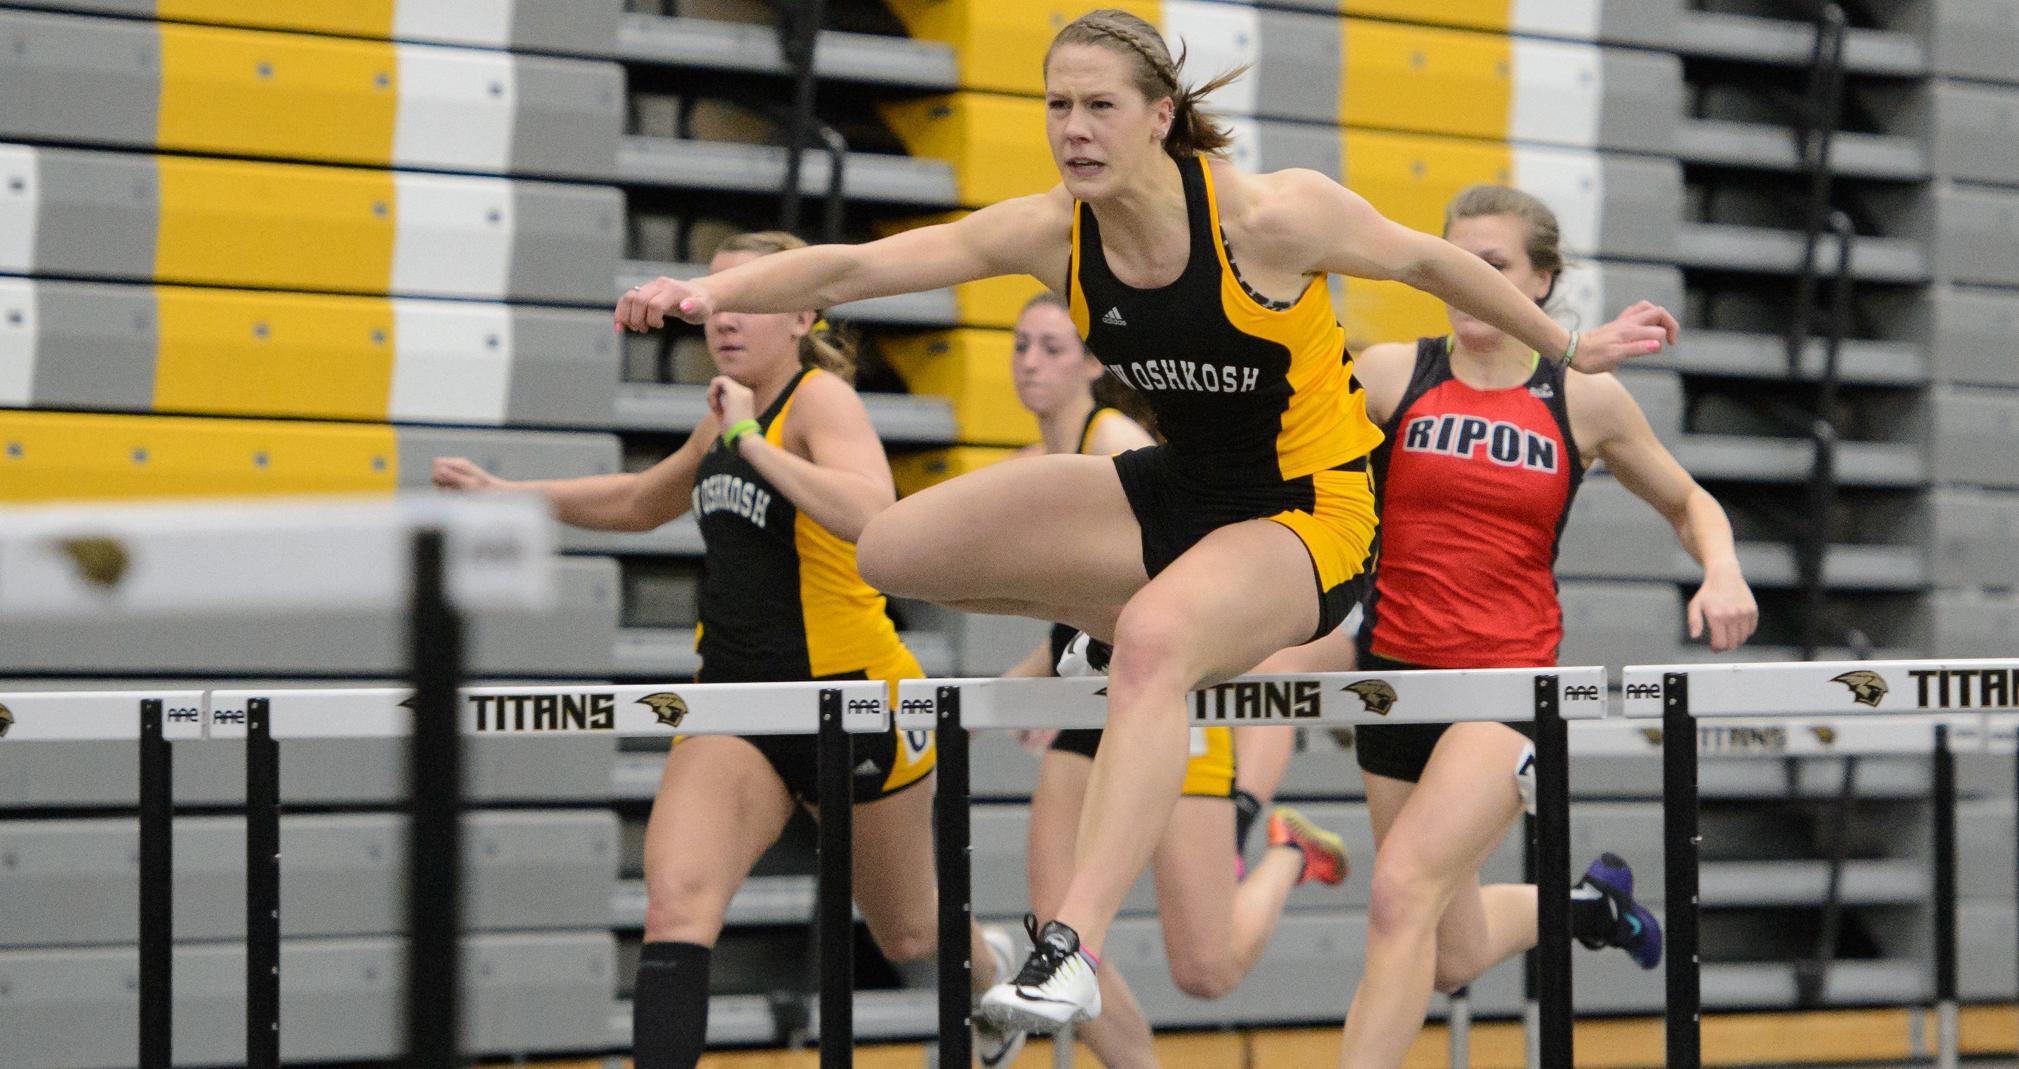 Taylor Sherry broke her own school record in the 60-meter hurdles with a time of 8.88 seconds.